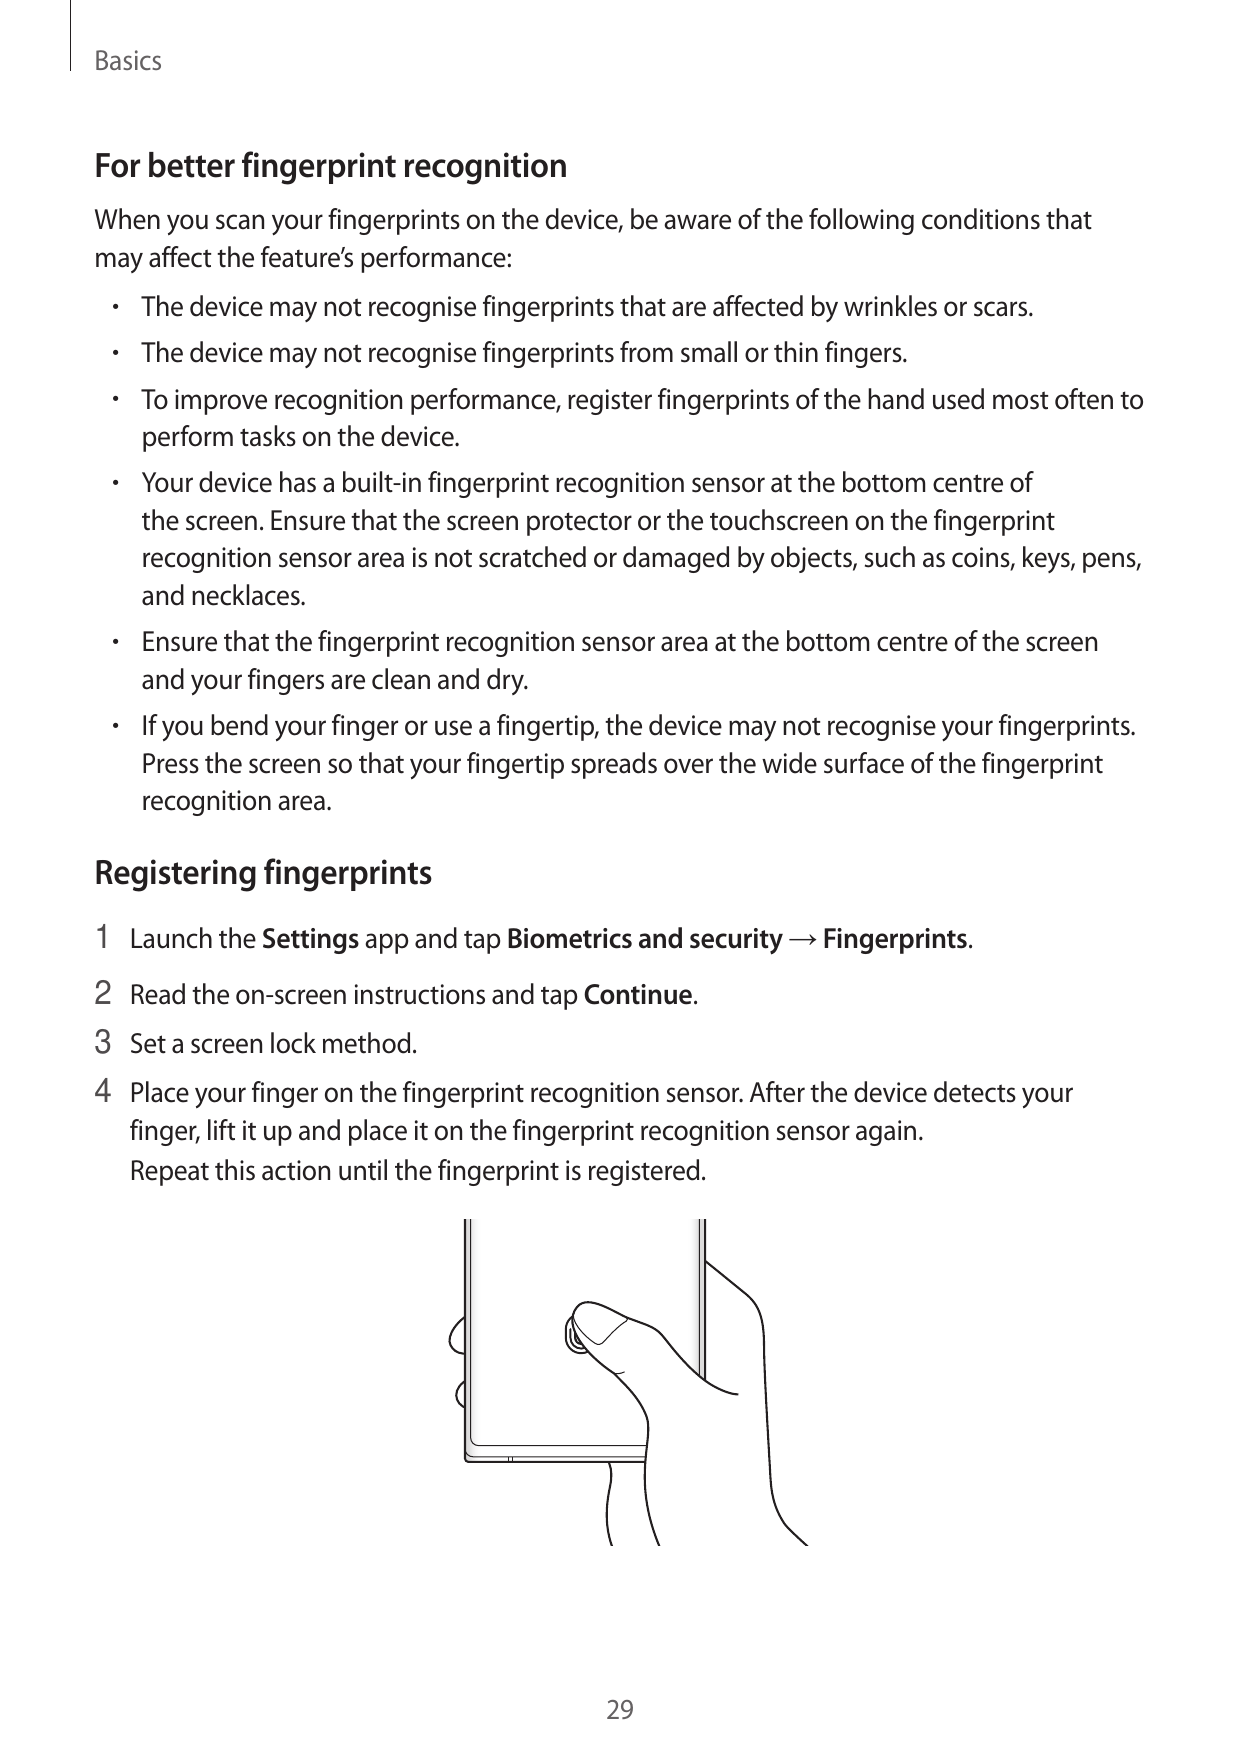 BasicsFor better fingerprint recognitionWhen you scan your fingerprints on the device, be aware of the following conditions that